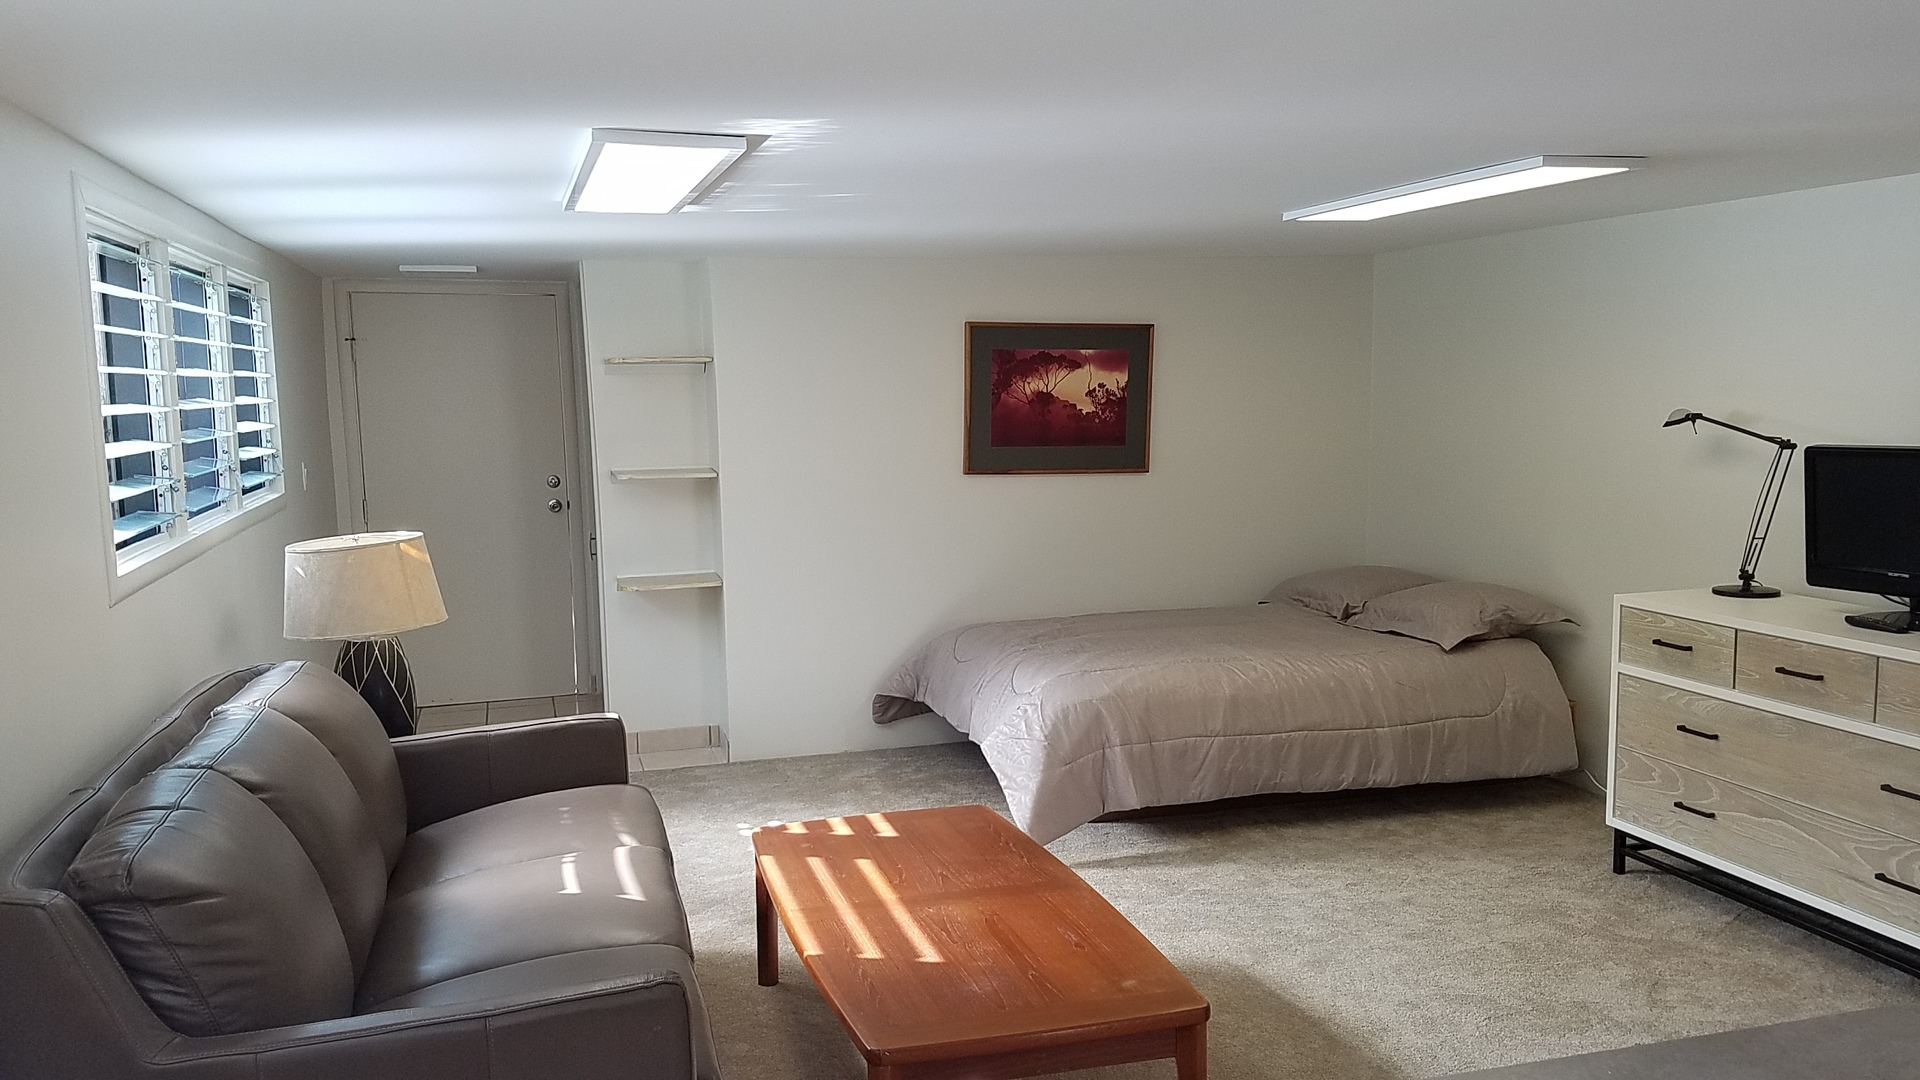 Cozy and Quiet Furnished Studio...Super convenient location next to K.C.C- must see!!!!!